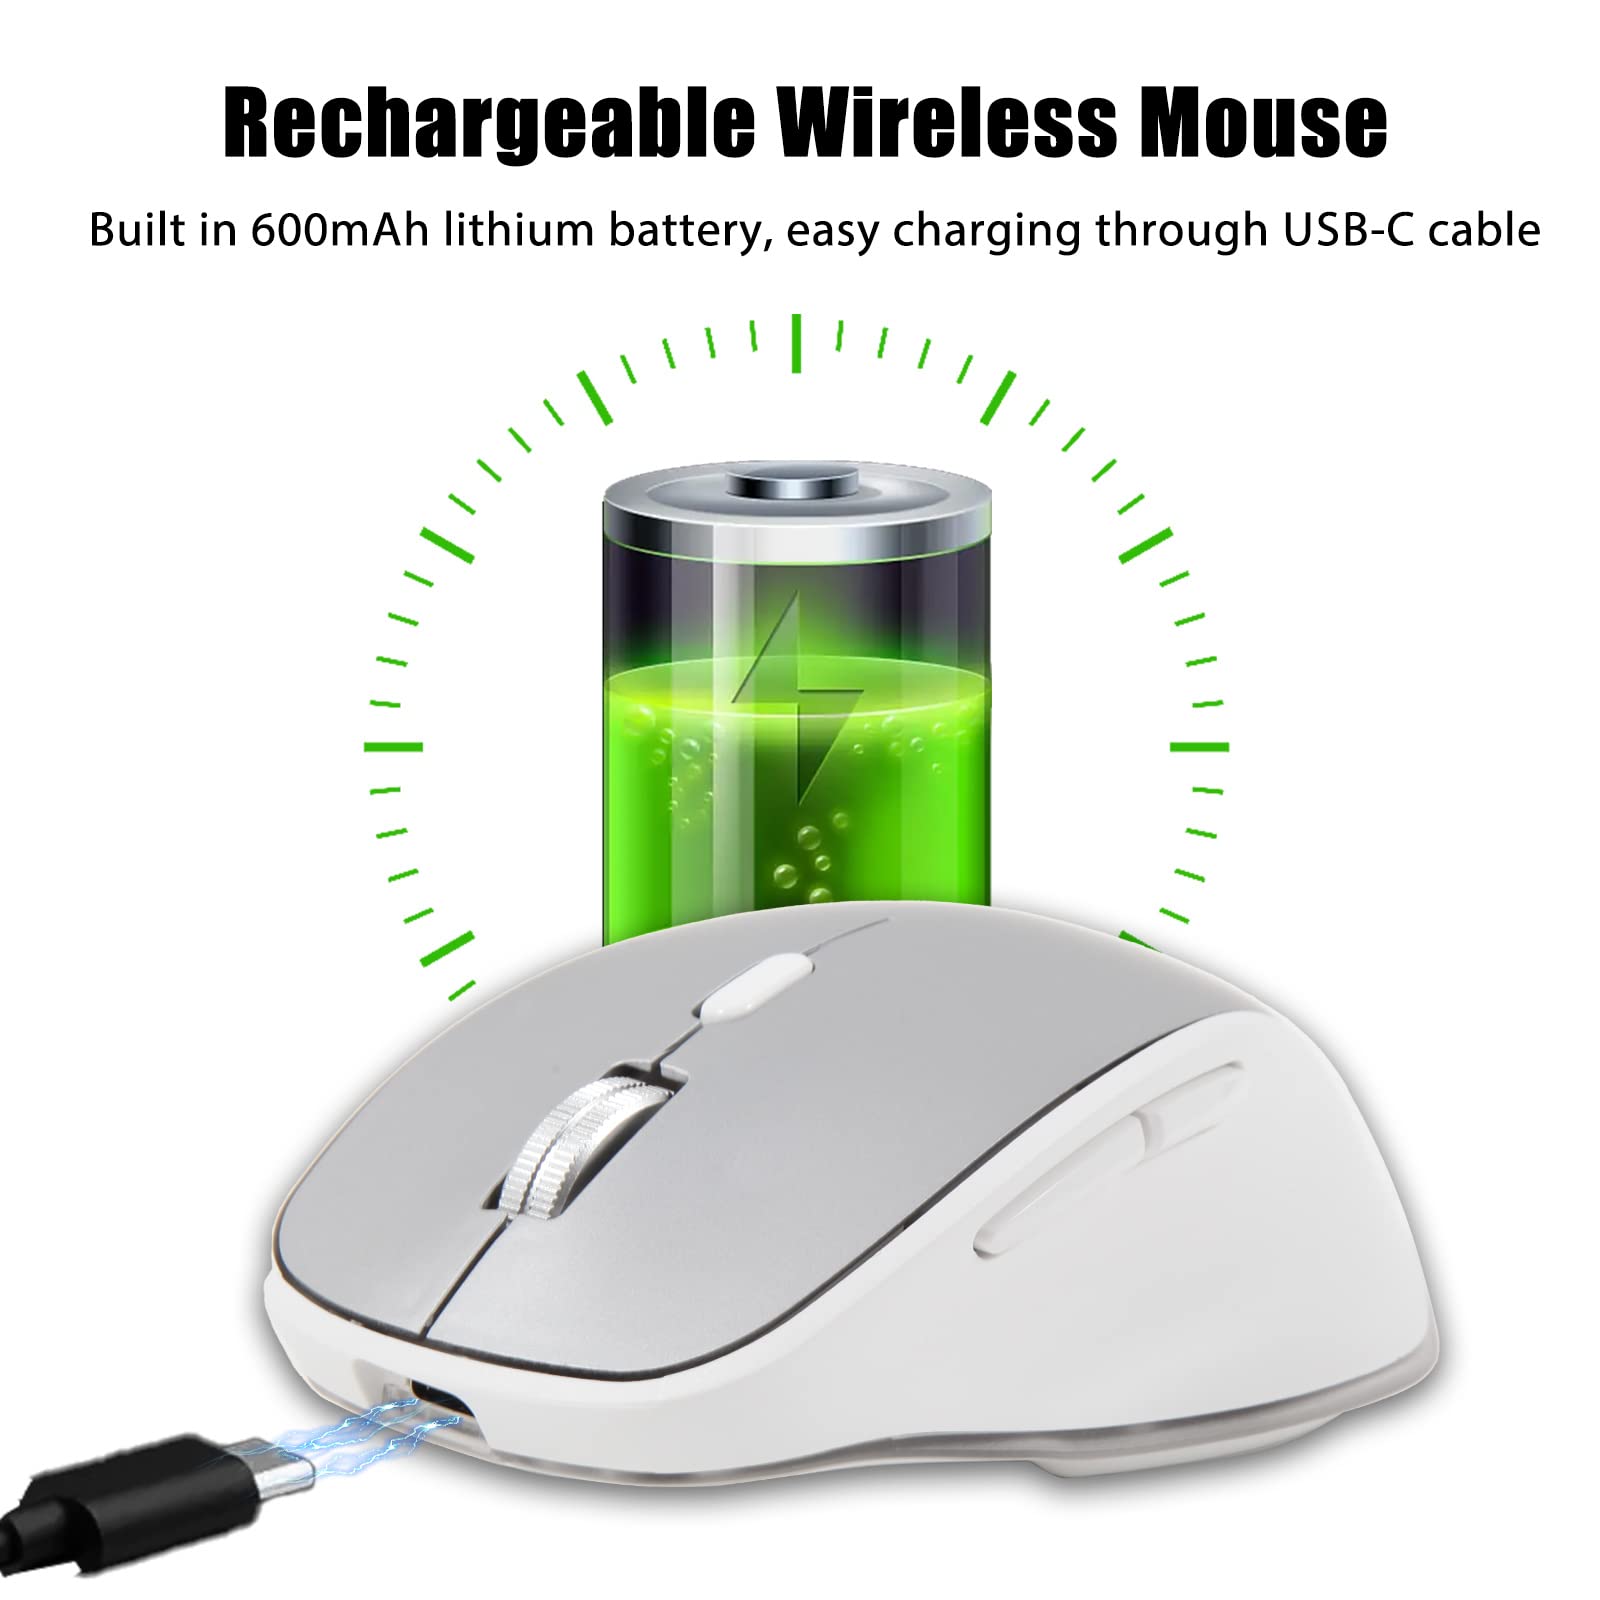 SHUNJINRUN Bluetooth Mouse, Rechargeable Wireless Computer Mouse 3 Modes(BT5.0/BT3.0/USB) Silent Cordless Mice for Laptop/Surface Pro/Windows/PC/Chromebook/Mac/MacBook Pro/Ipad/Tablet - Silver White